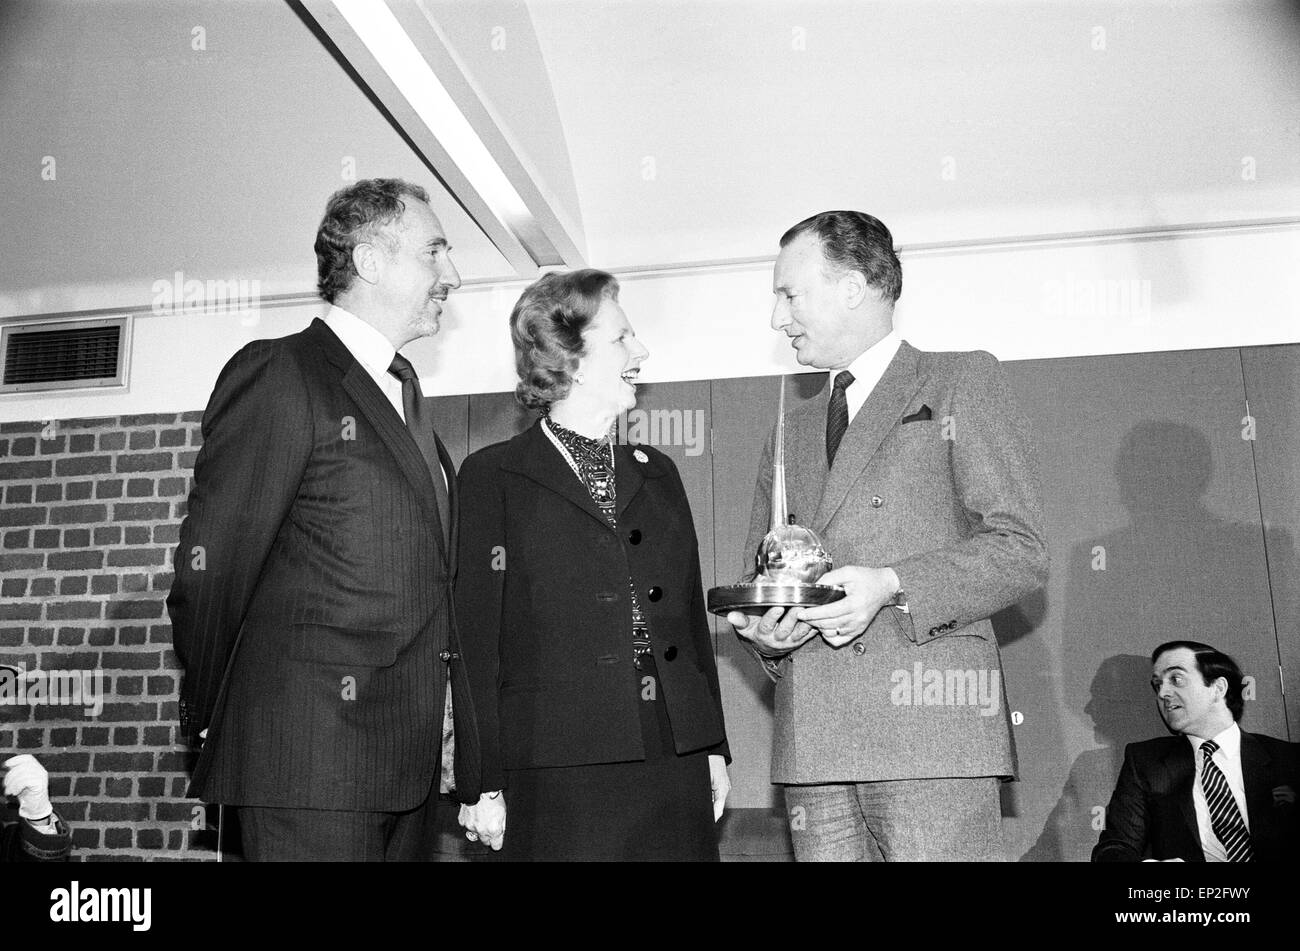 Prime Minister Margaret Thatcher presents the National Vala Award of the 'National Viewers and Listeners Association' to the team of BBC TV Programme 'Yes Minister', pictured London, January 1984. Cast members on stage: Paul Eddington as MP Jim Hacker. Nigel Hawthorne as Sir Humphrey Appleby. Stock Photo